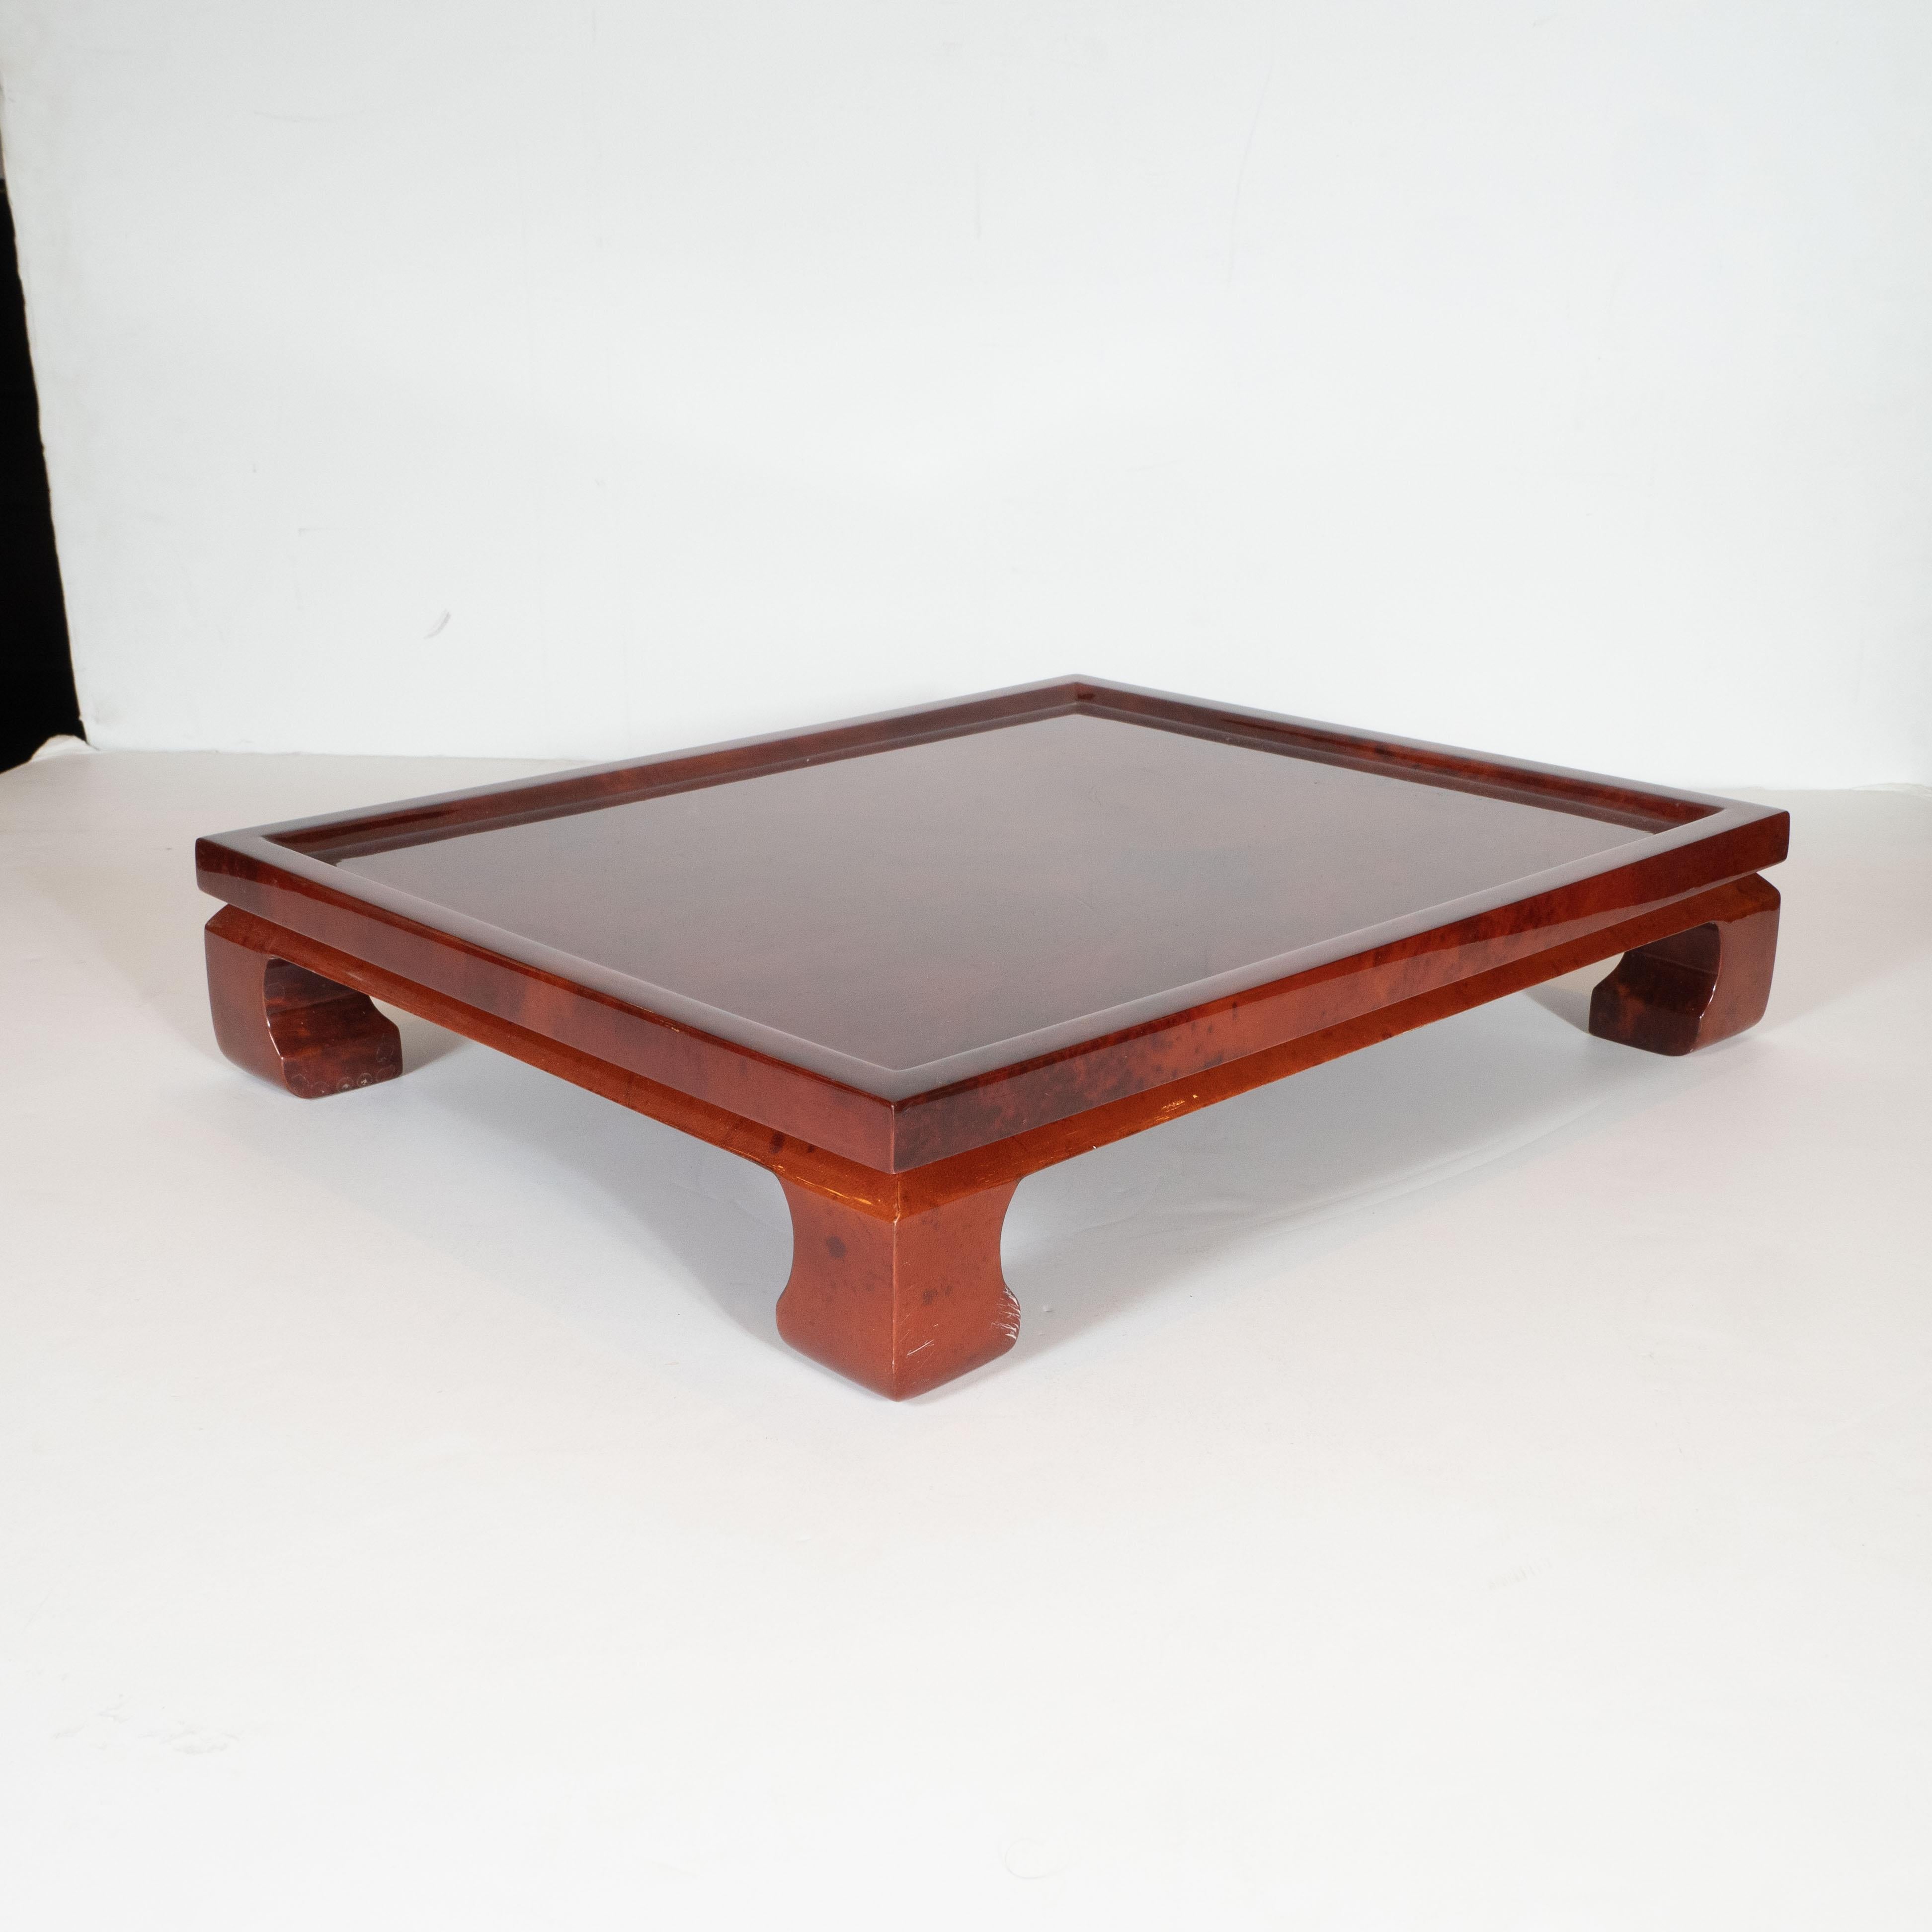 Late 20th Century Enrique Garcel Mid-Century Modern Lacquered Goatskin Pagoda Style Bar Tray For Sale